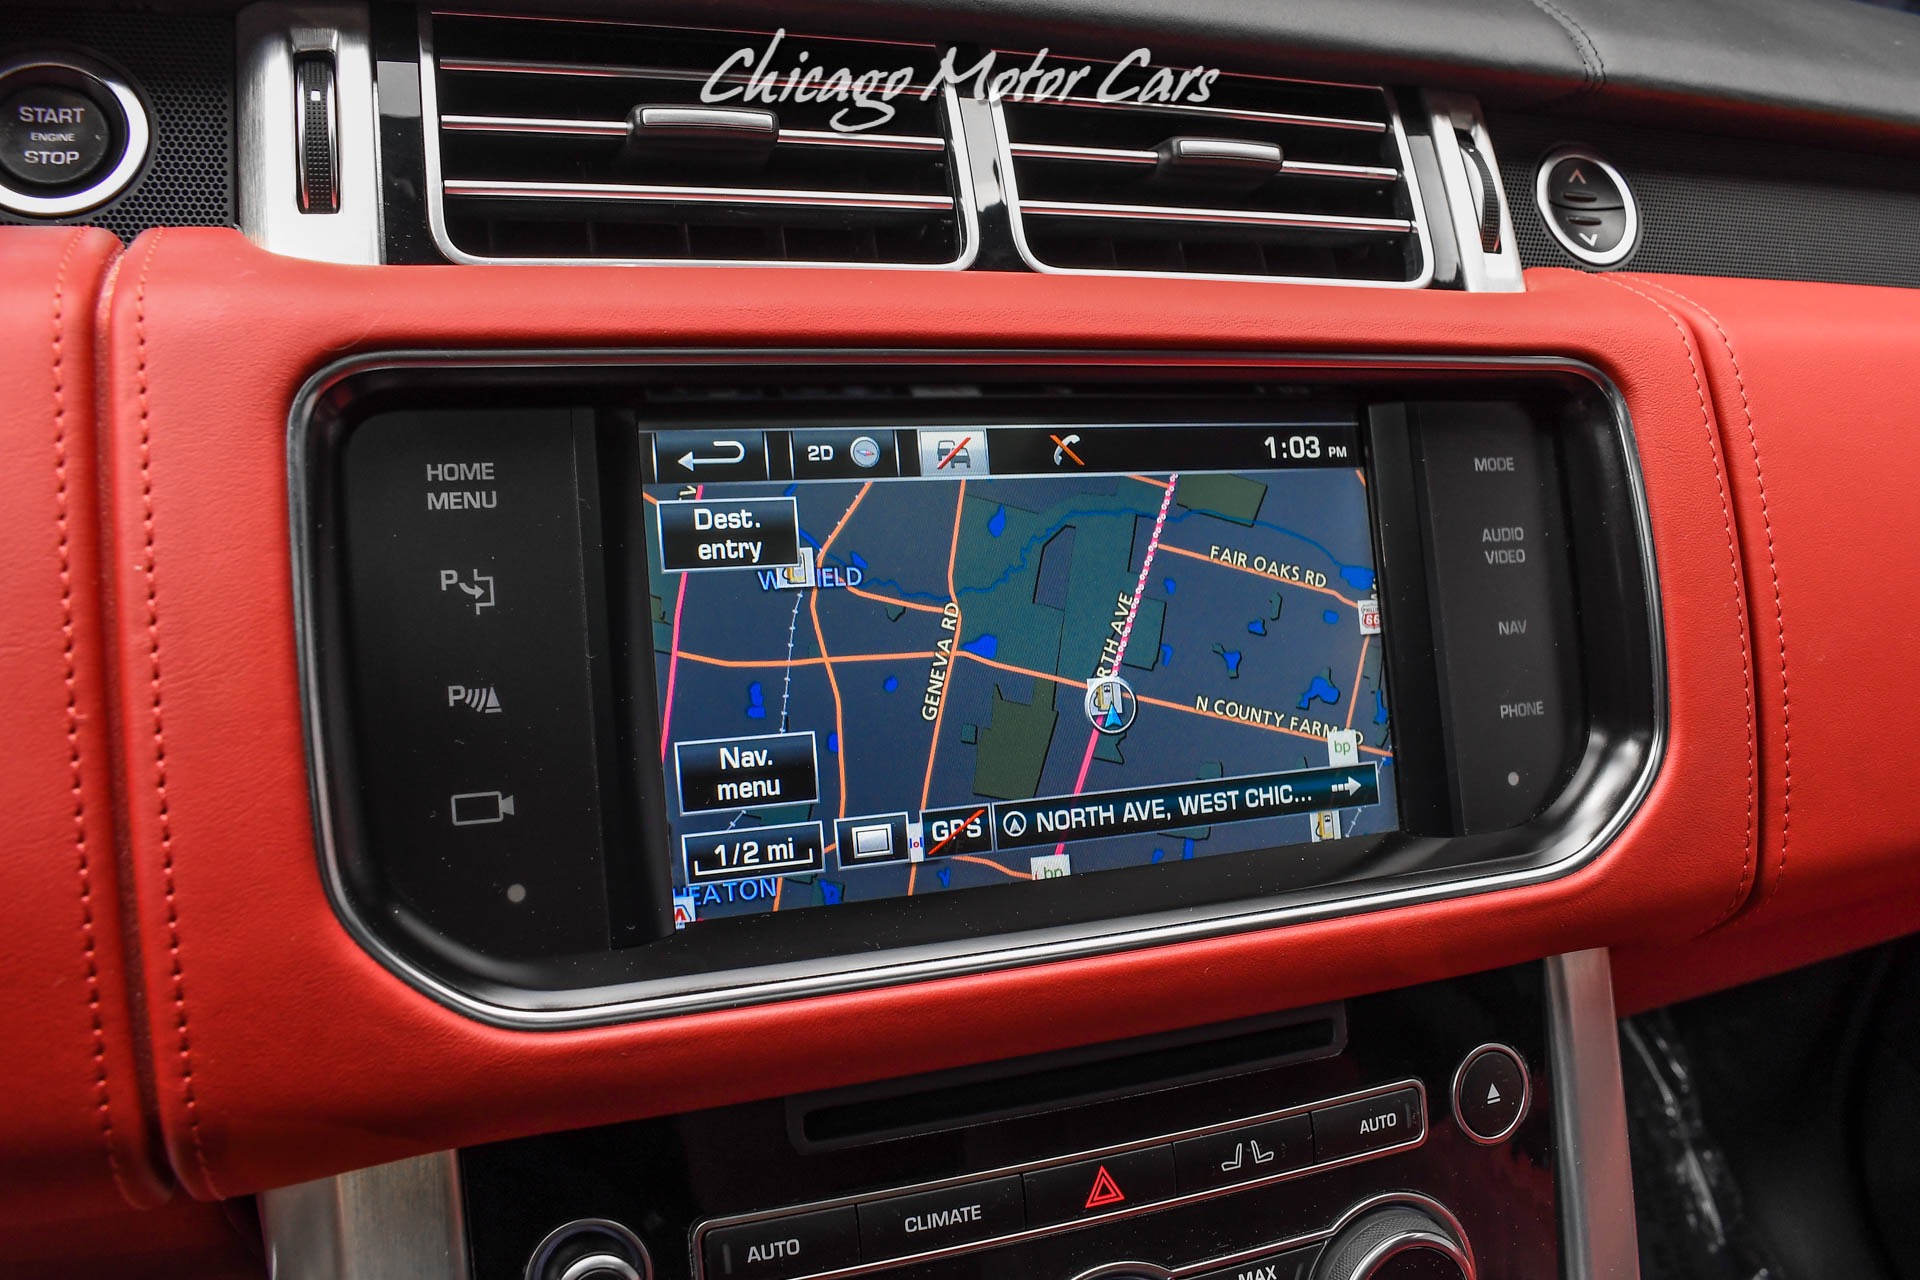 Used-2014-Land-Rover-Range-Rover-Autobiography-Rare-Red-Interior-Rear-Seat-Entertainment